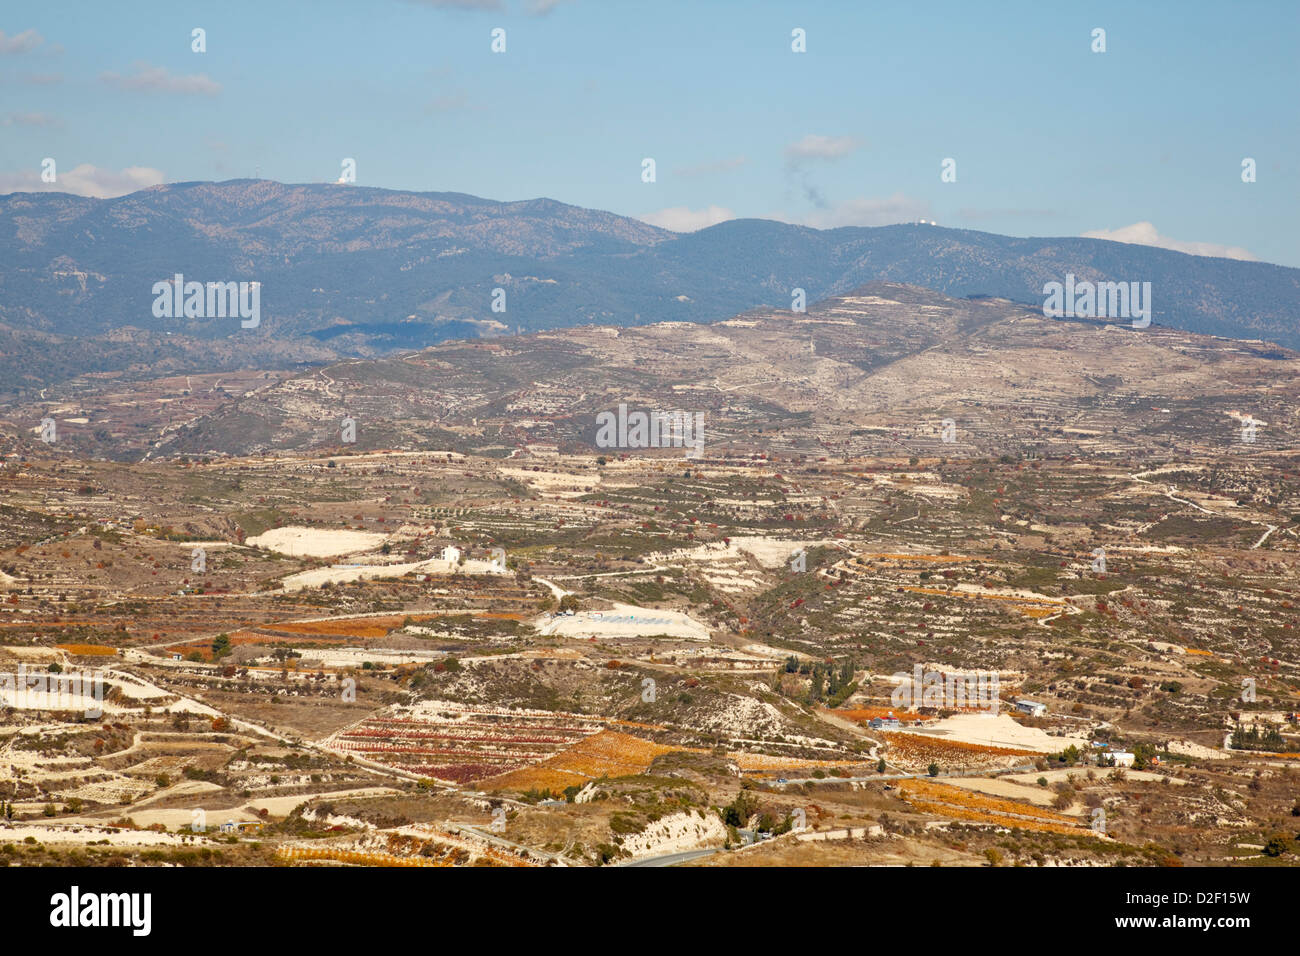 Overlooking dry grape vine terraces in the Troodos Foothills, Cyprus. The signals golf balls on Mount Olympus can be seen on the Stock Photo